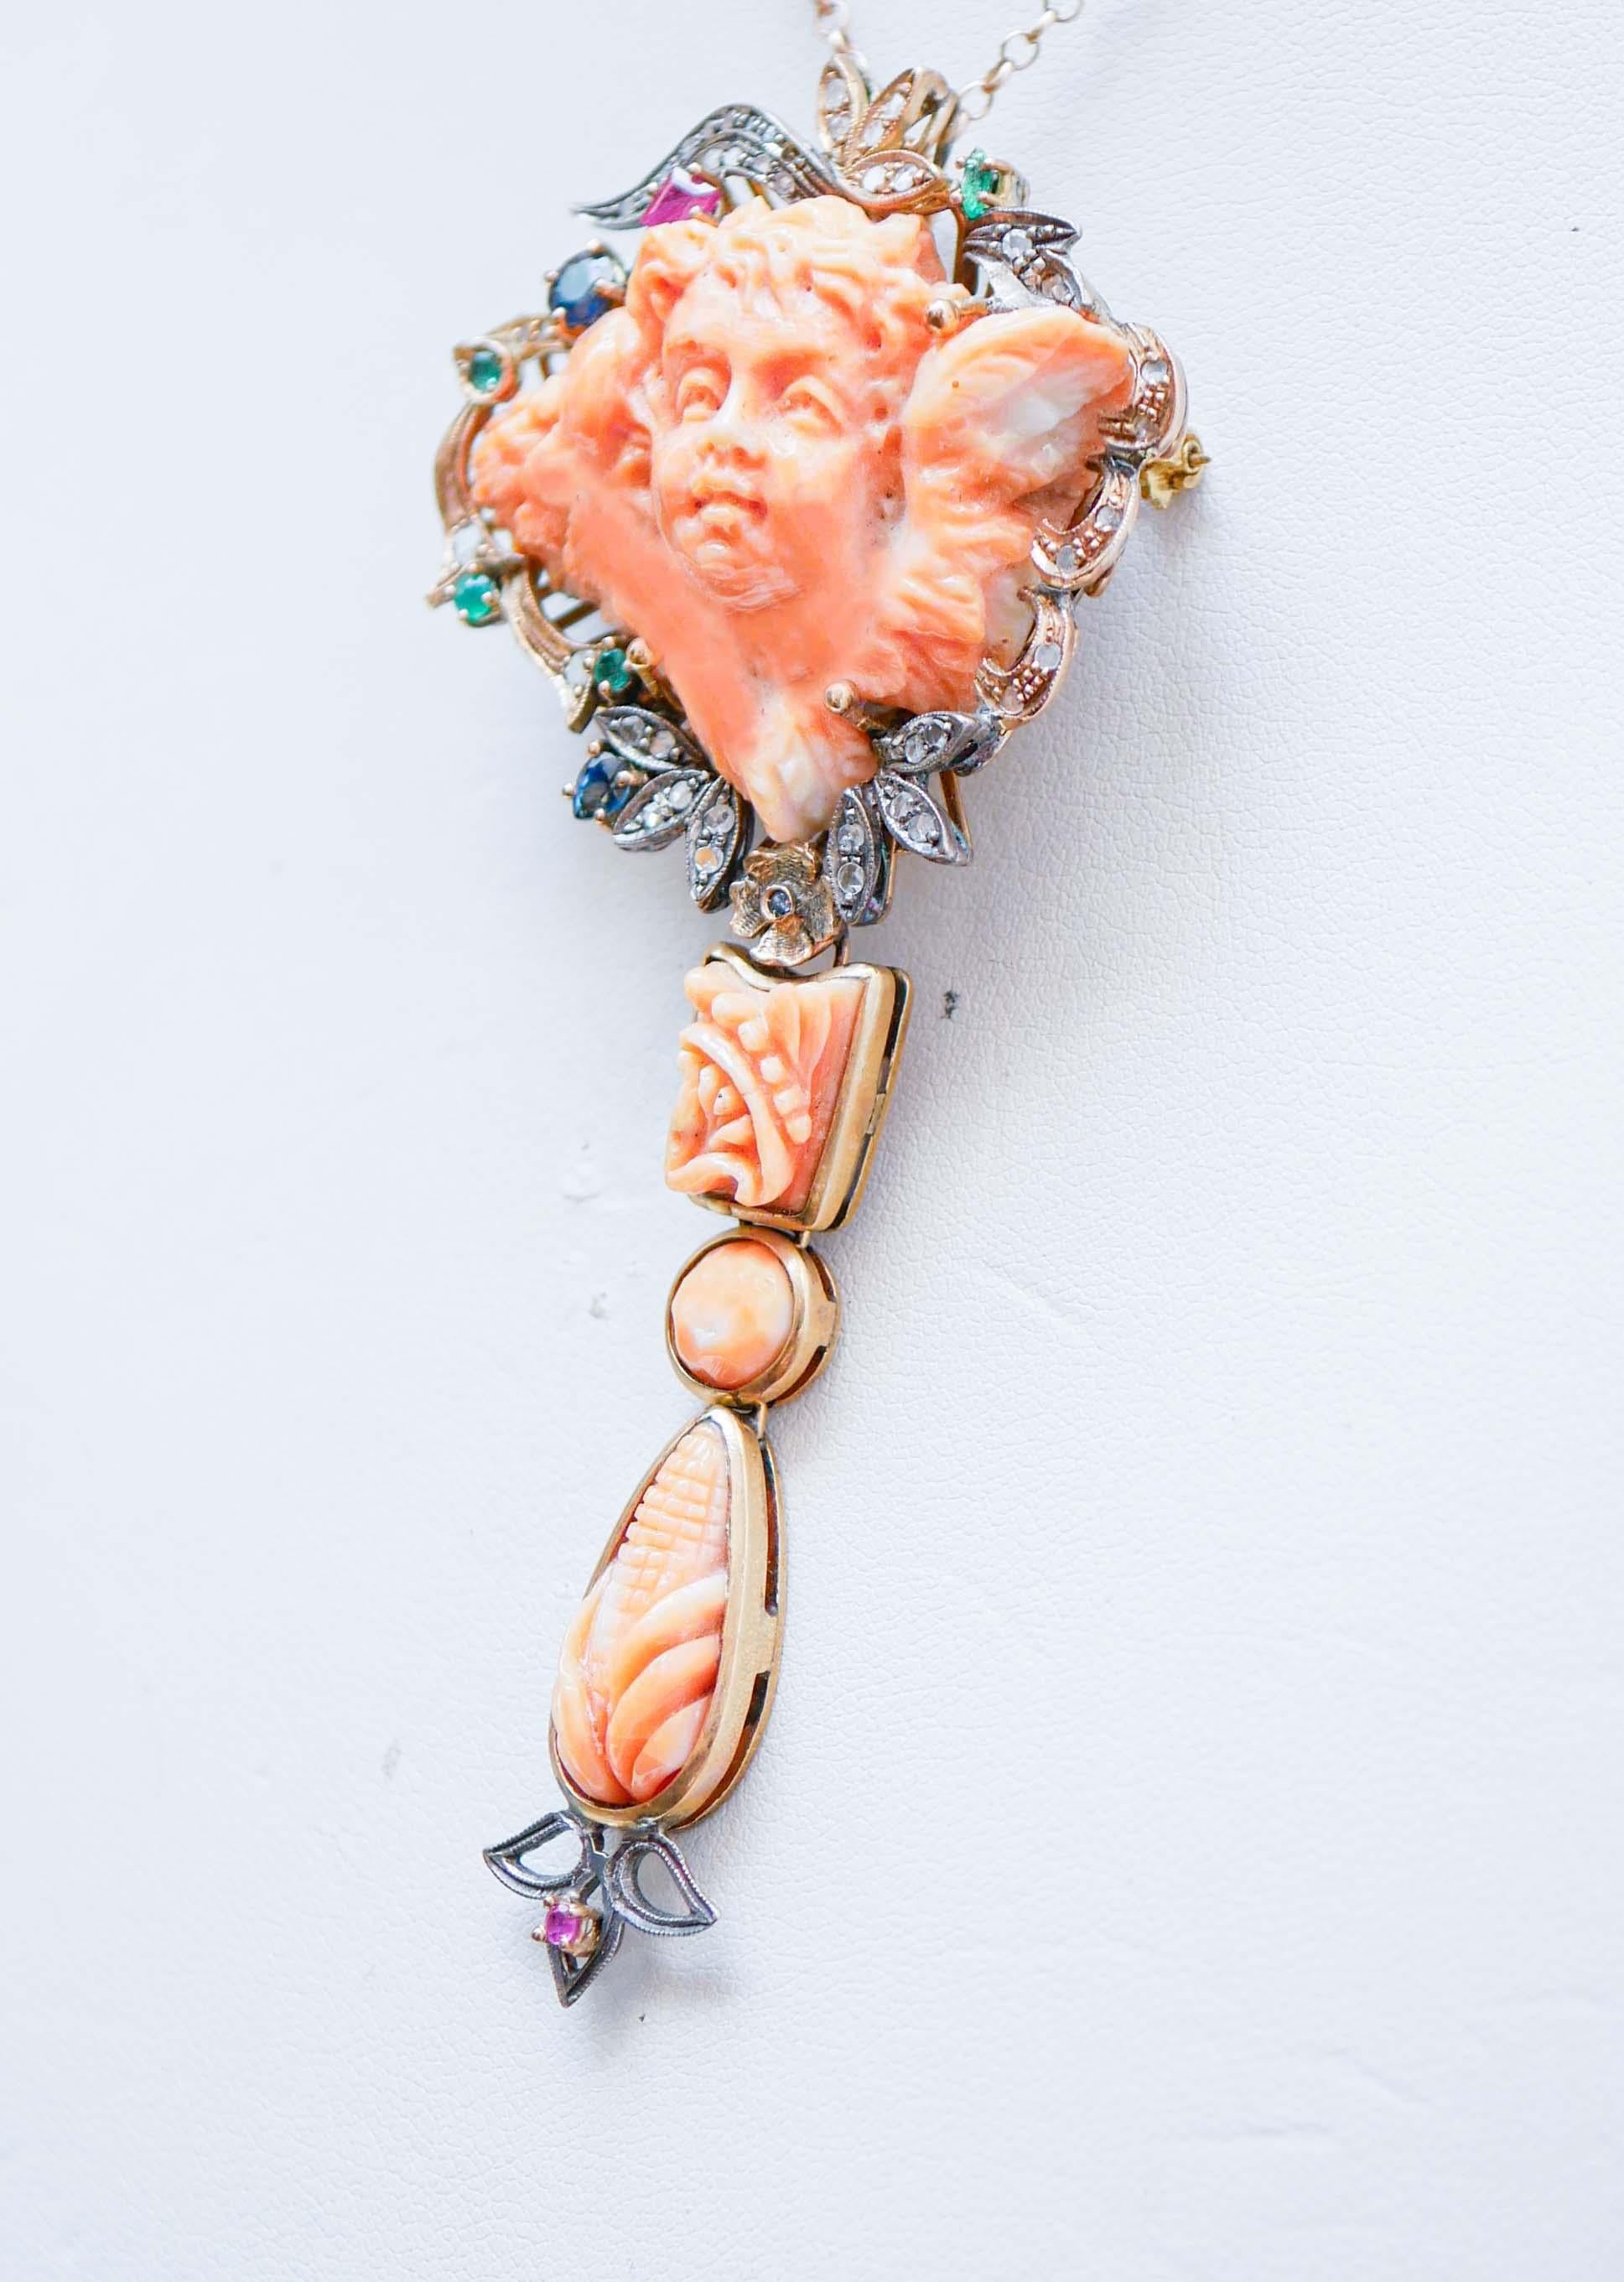 Retro Coral, Emeralds, Rubies, Sapphires, Diamonds, Gold and Silver Brooch/Pendant. For Sale